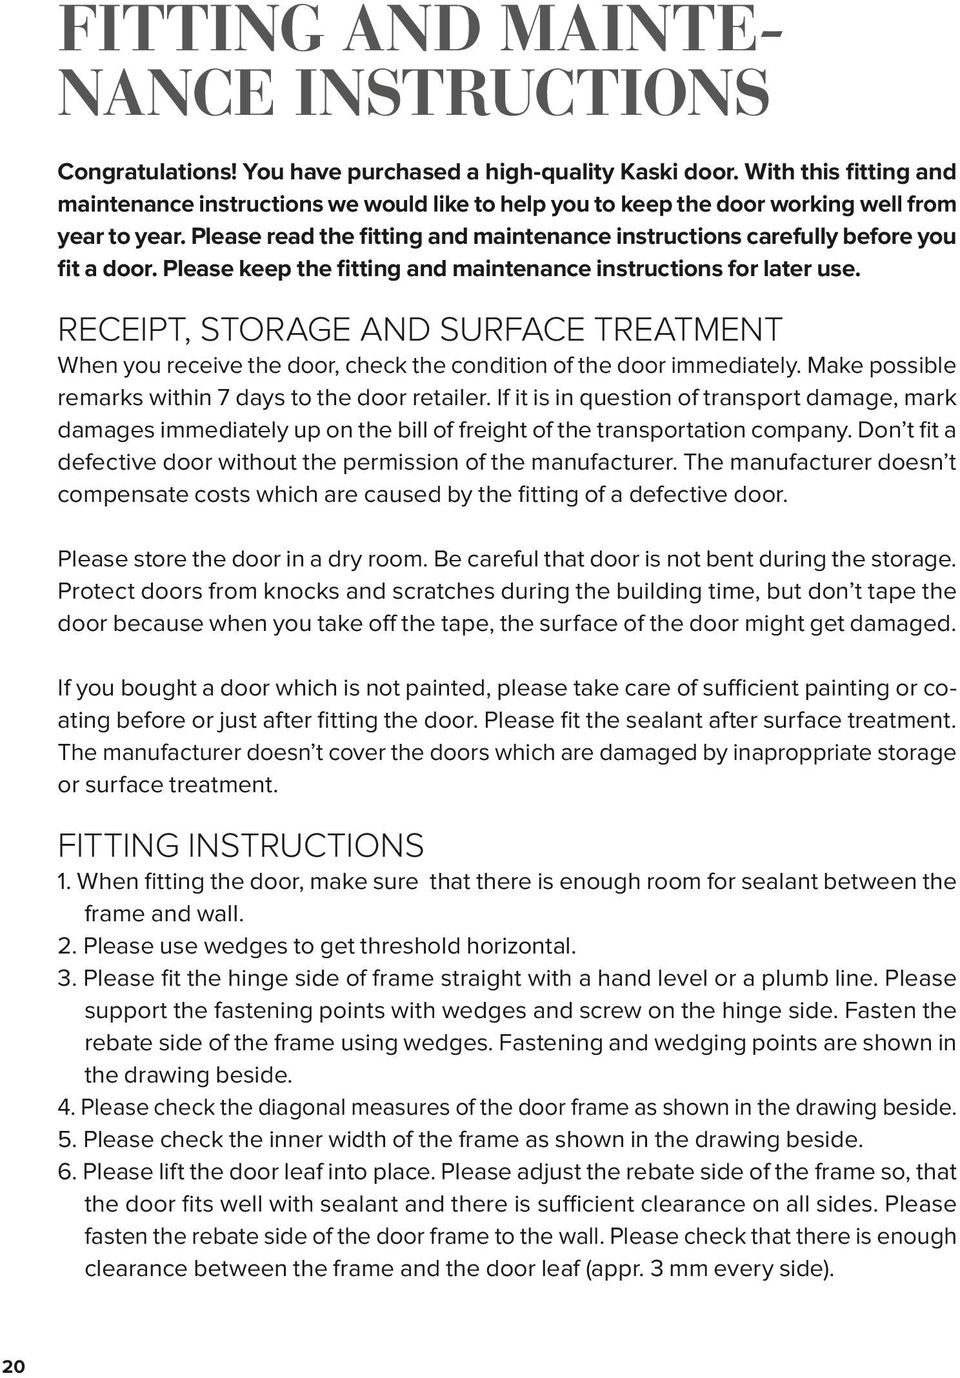 Please read the fitting and maintenance instructions carefully before you fit a door. Please keep the fitting and maintenance instructions for later use.